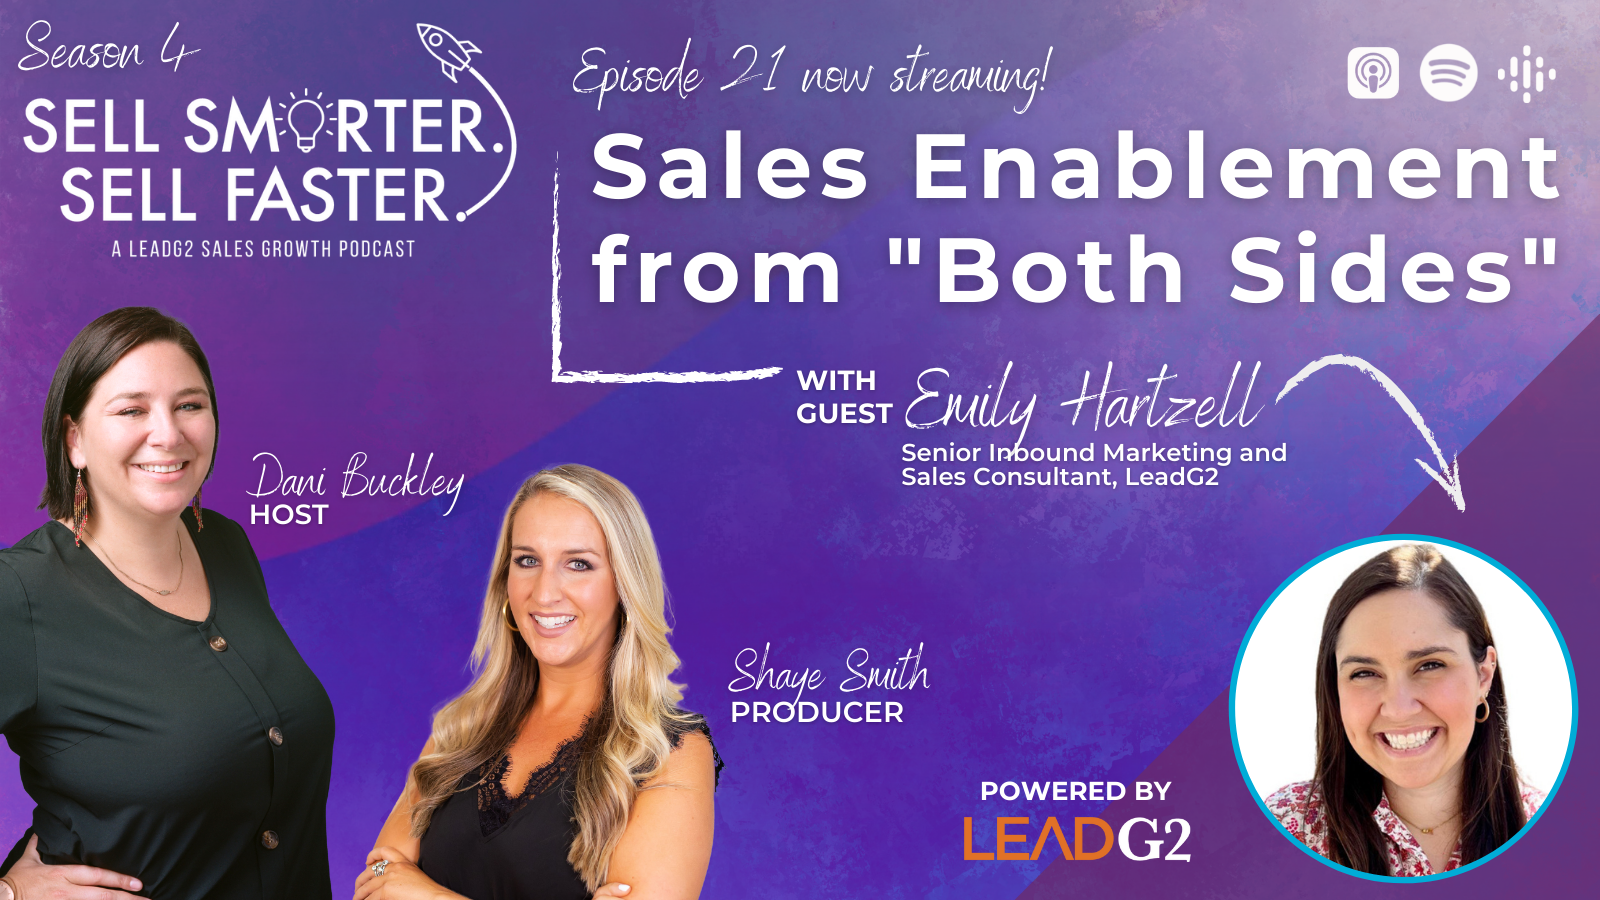 Sales Enablement from “Both Sides” with Emily Hartzell